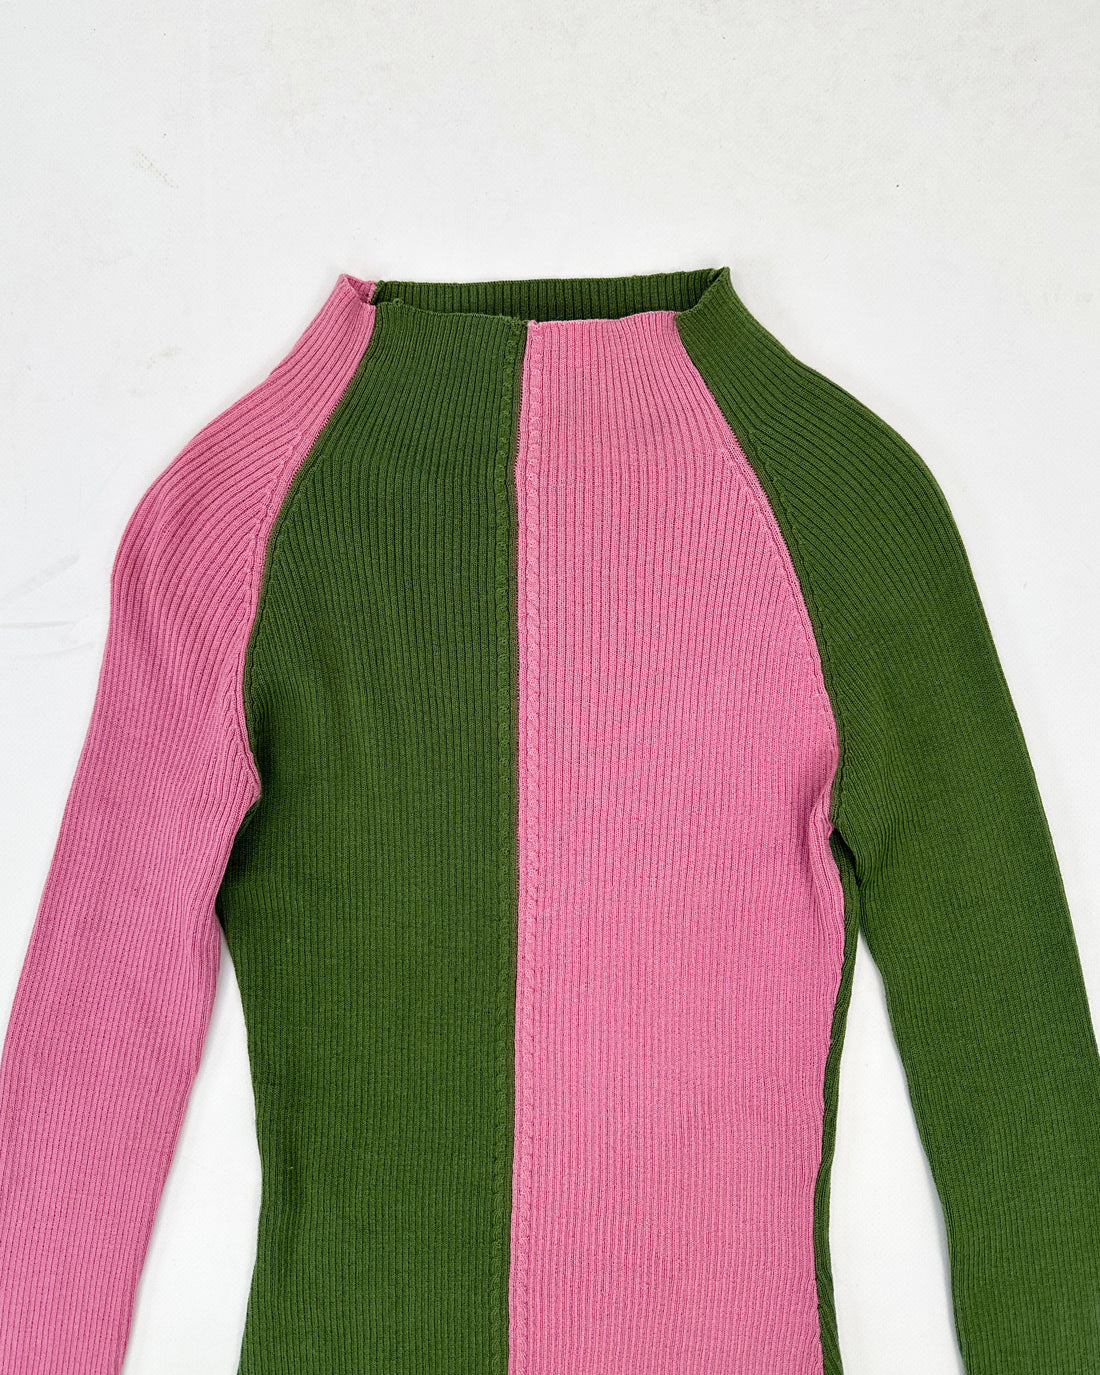 Versace Bicolor Knitted Top 2000's